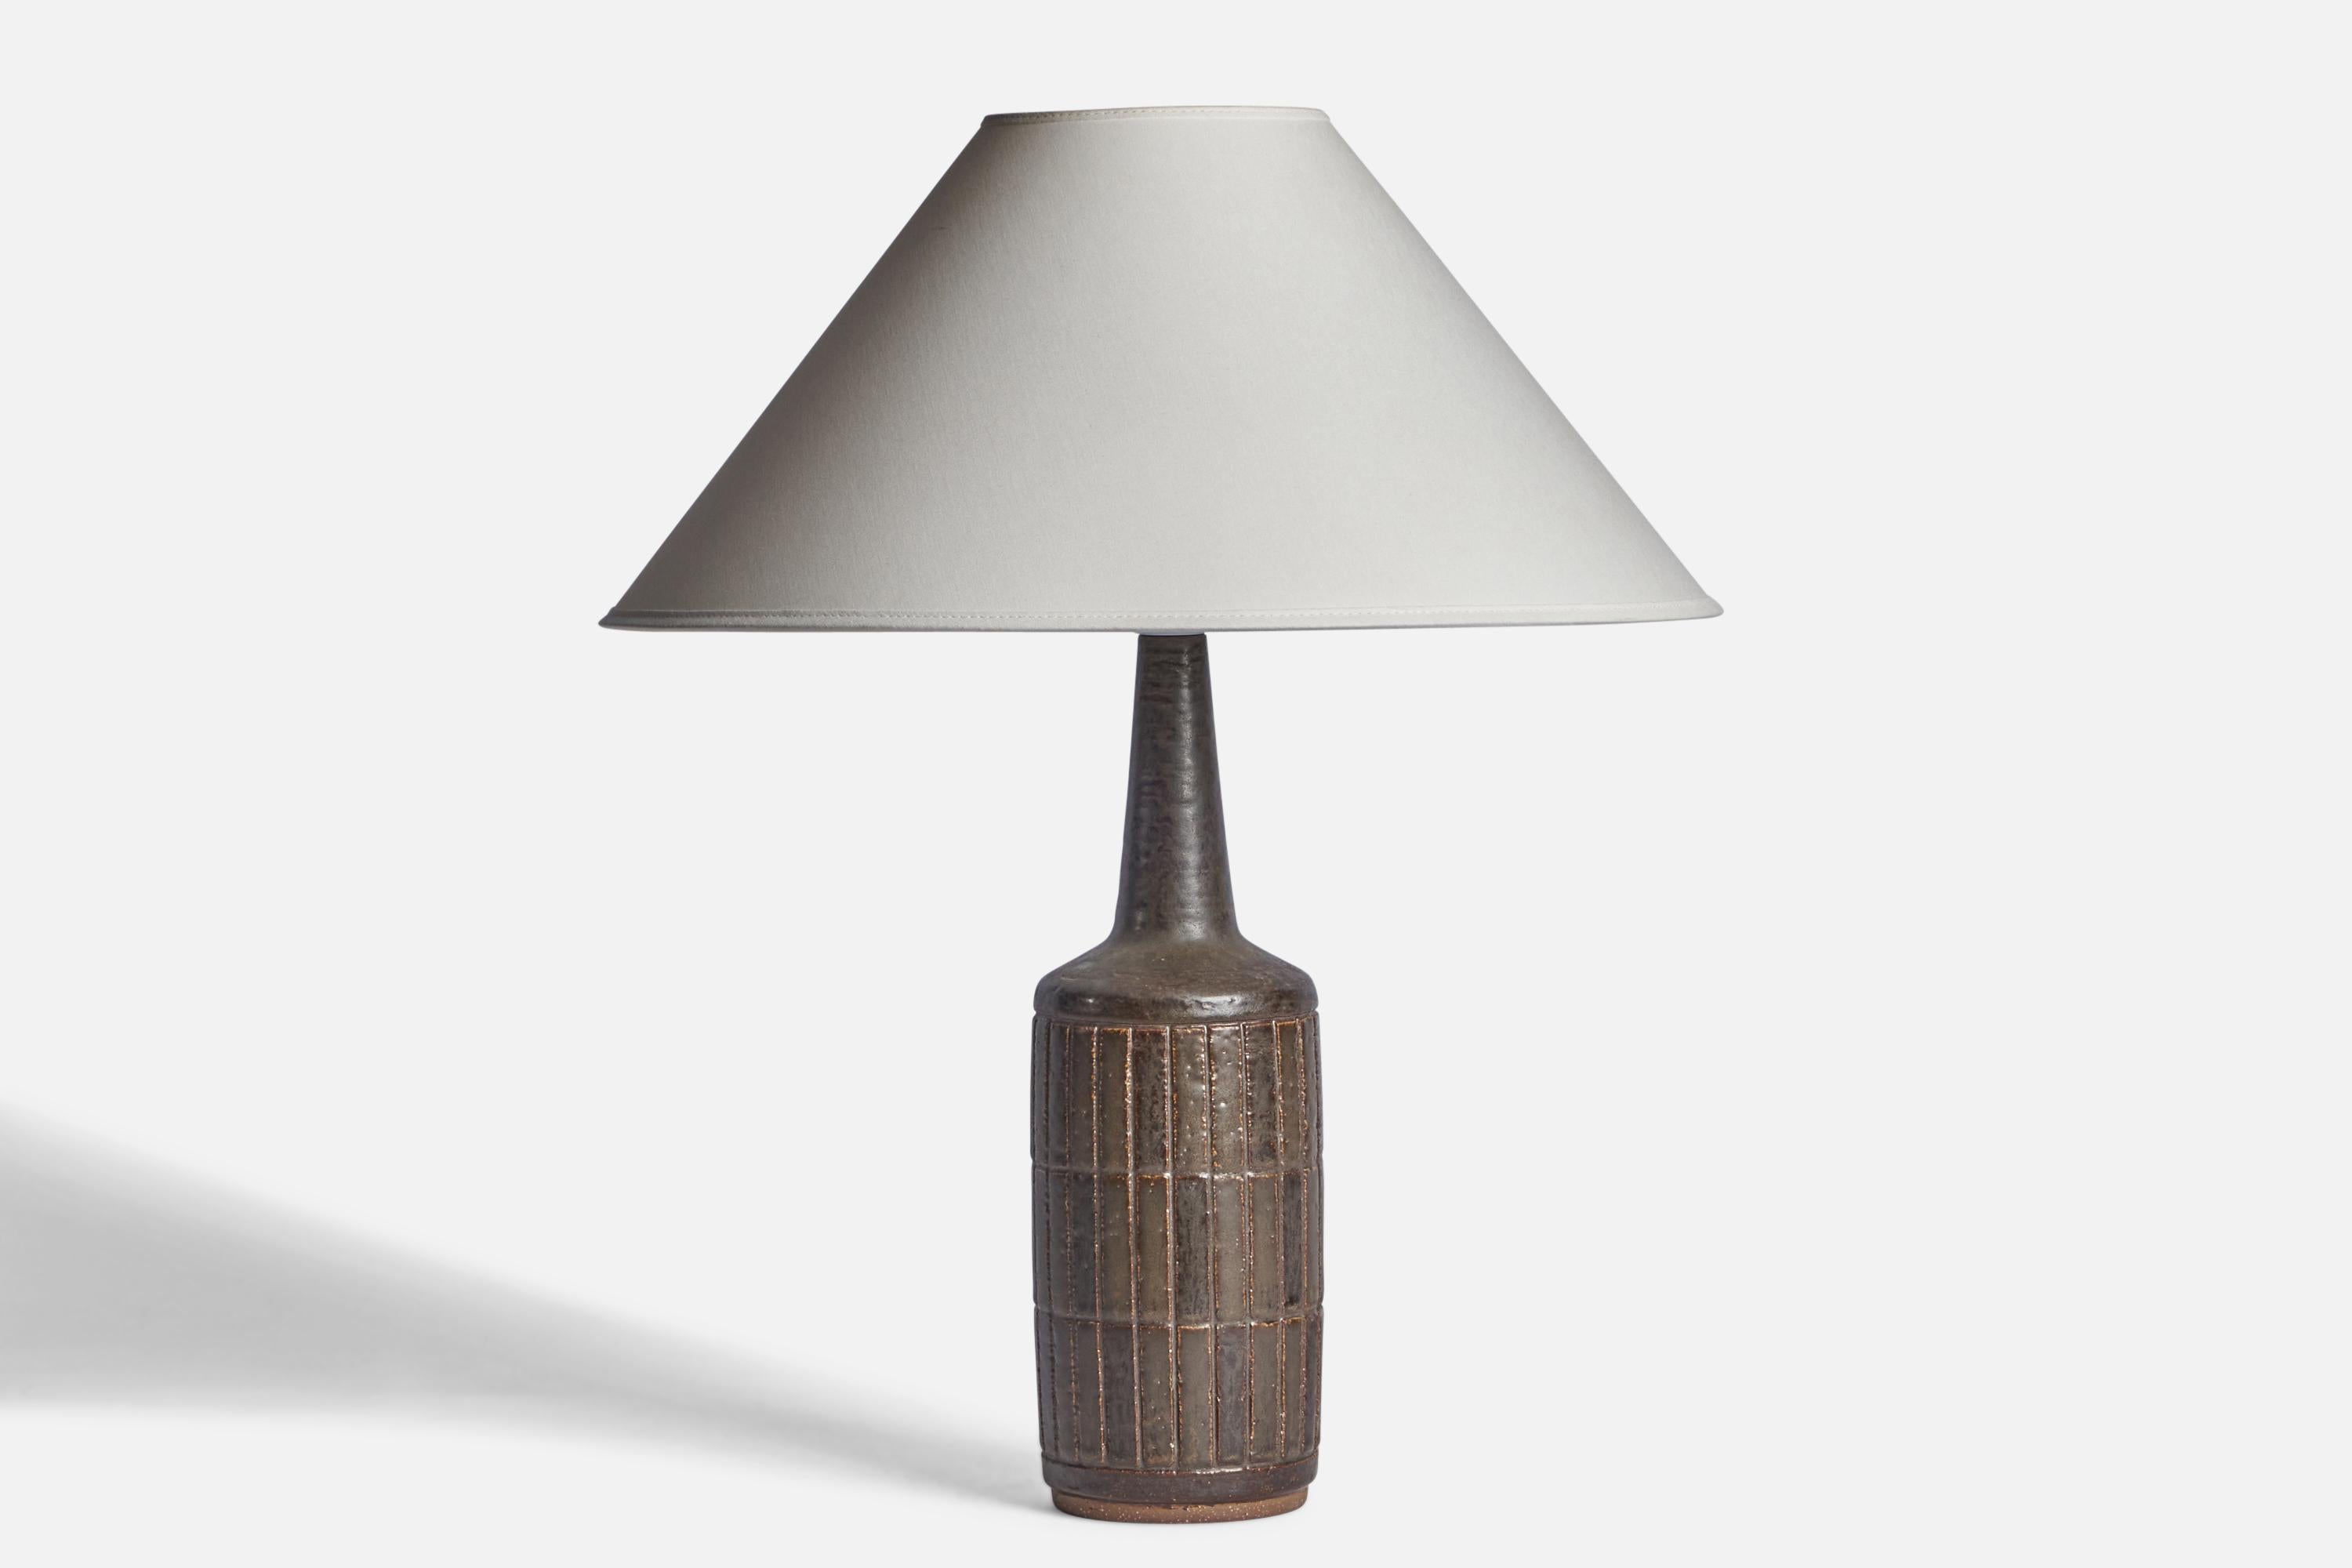 A brown-glazed stoneware table lamp designed by Per & Annelise Linneman-Schmidt and produced by Palshus, Denmark, 1960s.

Dimensions of Lamp (inches): 15.5” H x 4” Diameter
Dimensions of Shade (inches): 4.5” Top Diameter x 16” Bottom Diameter x